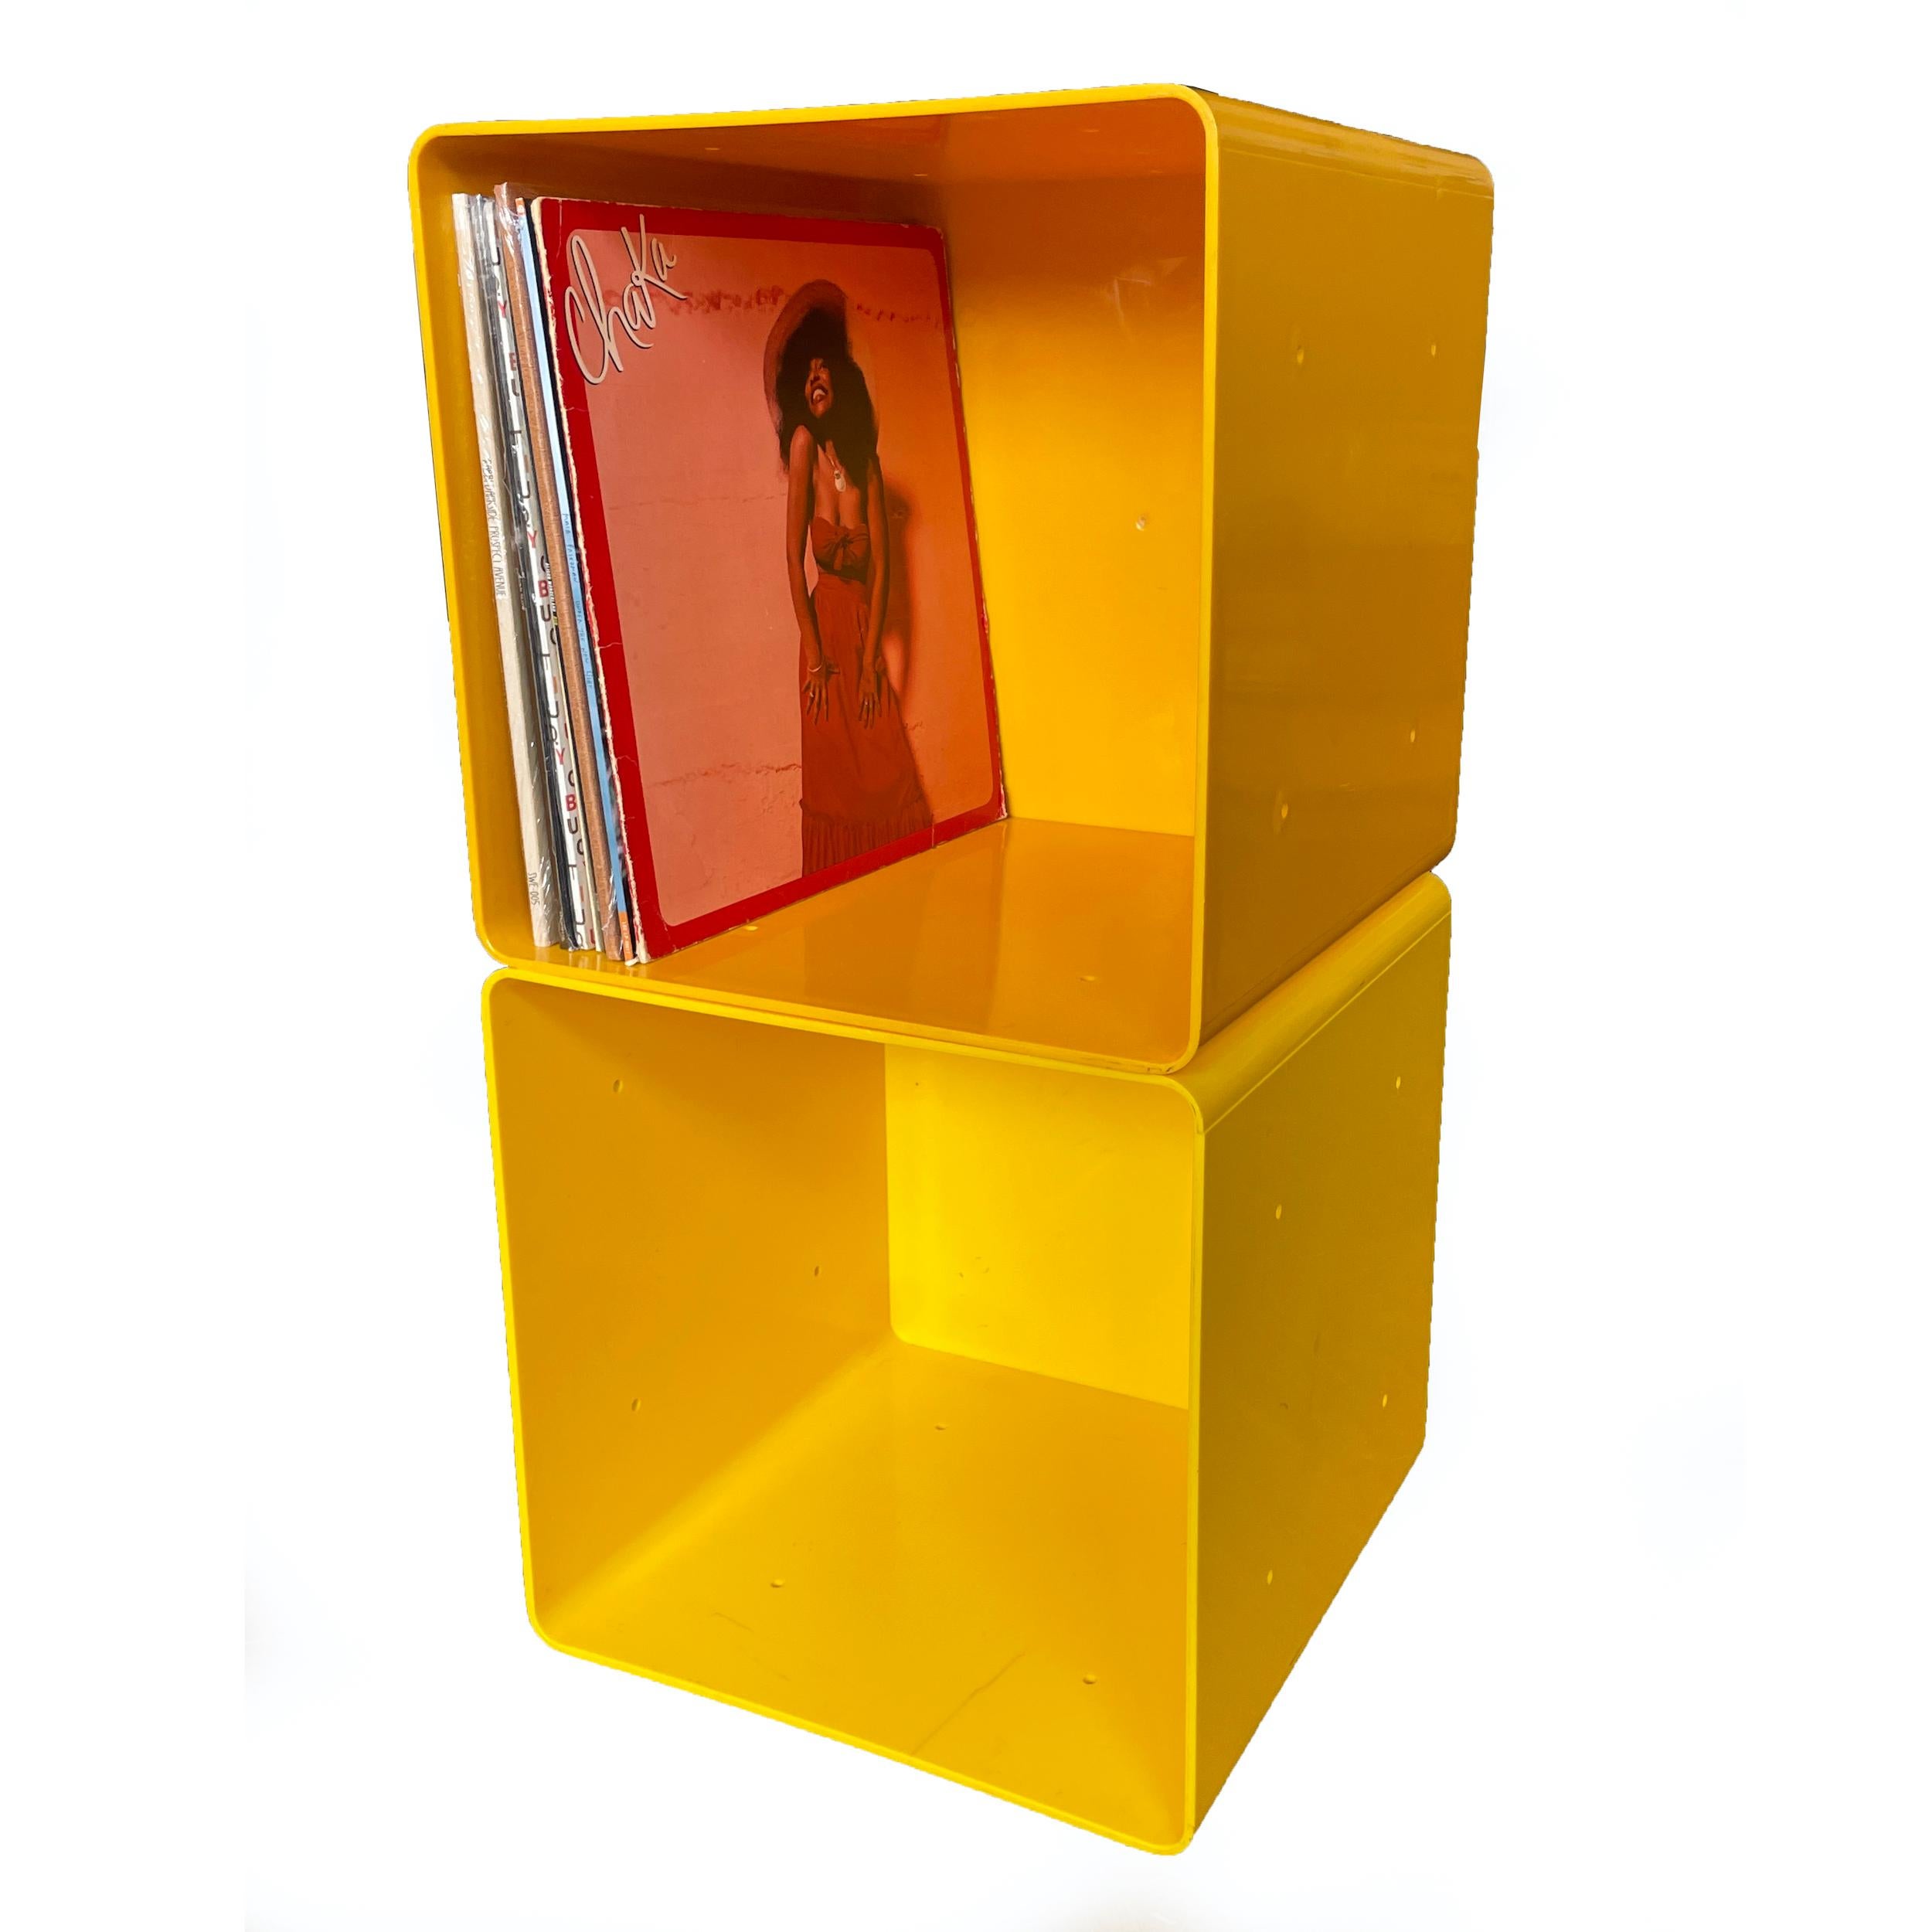 A pair of yellow plastic storage cubes in the style of Kartell or Palaset. Perfectly sized for storing vinyl records but could also be used for books or collectibles. The cubes have 4 small holes on each side so that they can be held together when